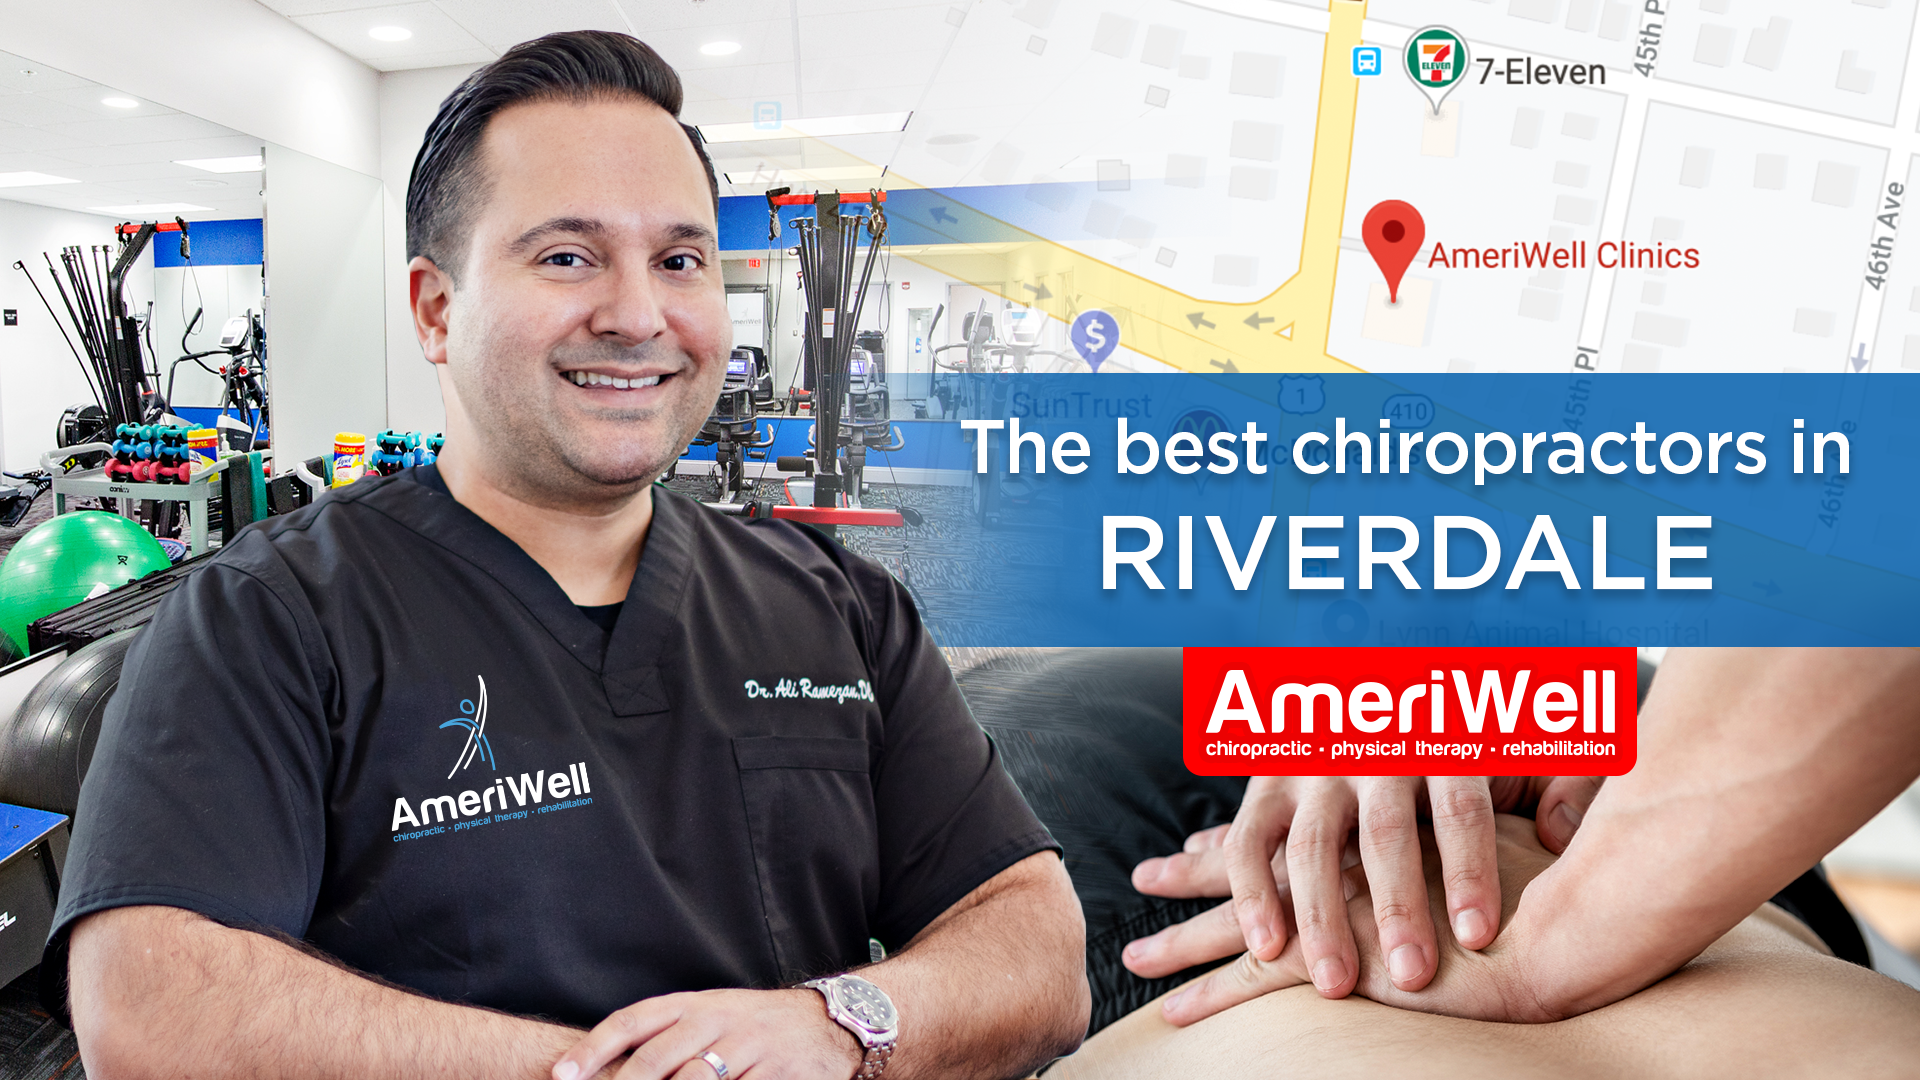 Riverdale – Ameriwell Clinics the best chiropractors